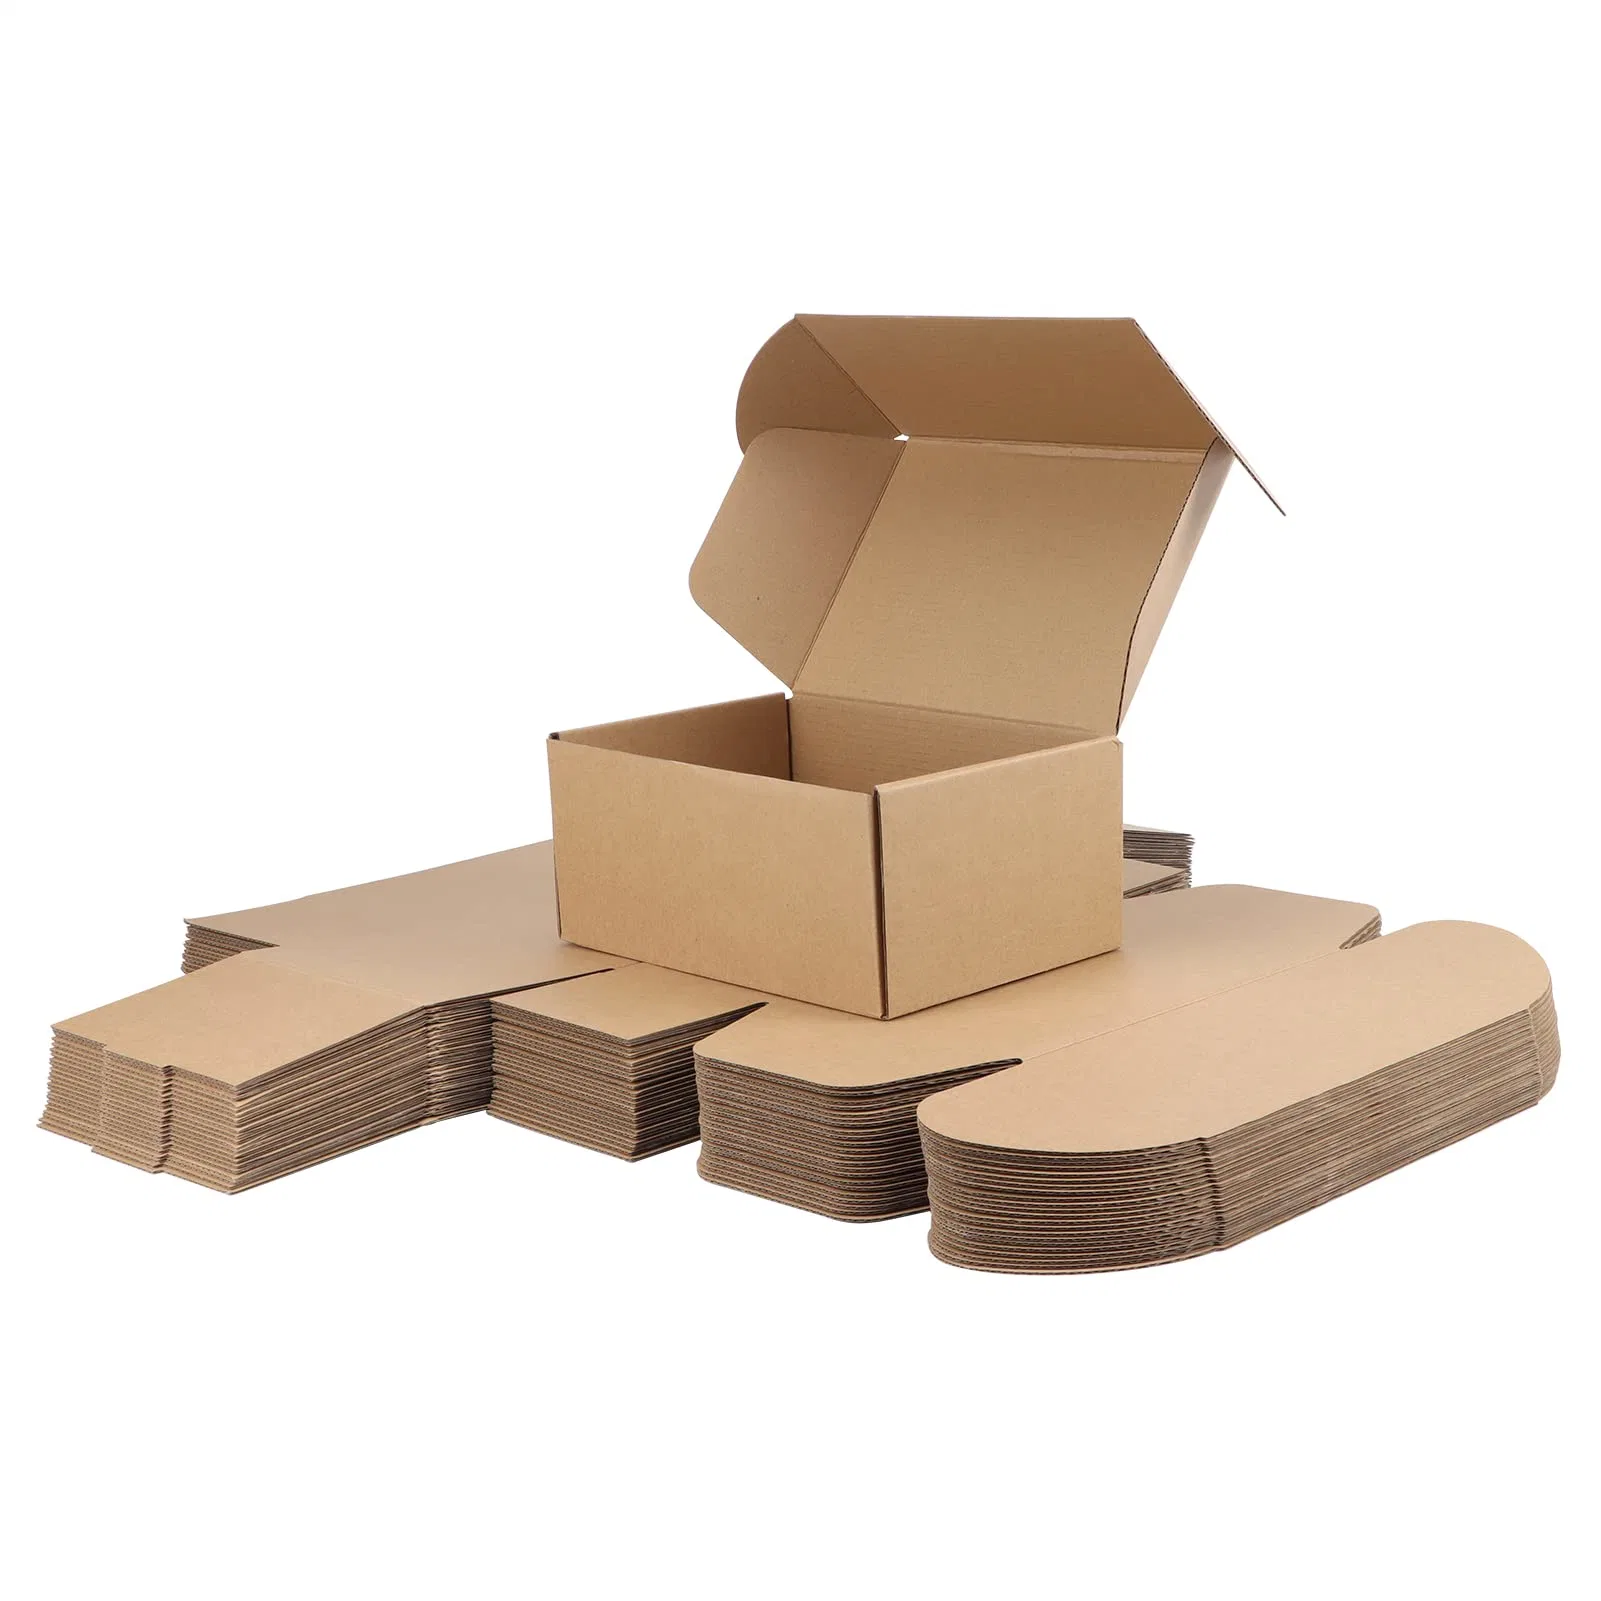 9X6X4 Inch Shipping Boxes, Brown Cardboard Gift Boxes with Lids for Wrapping Giving Women Men Presents, Corrugated Mailer Boxes